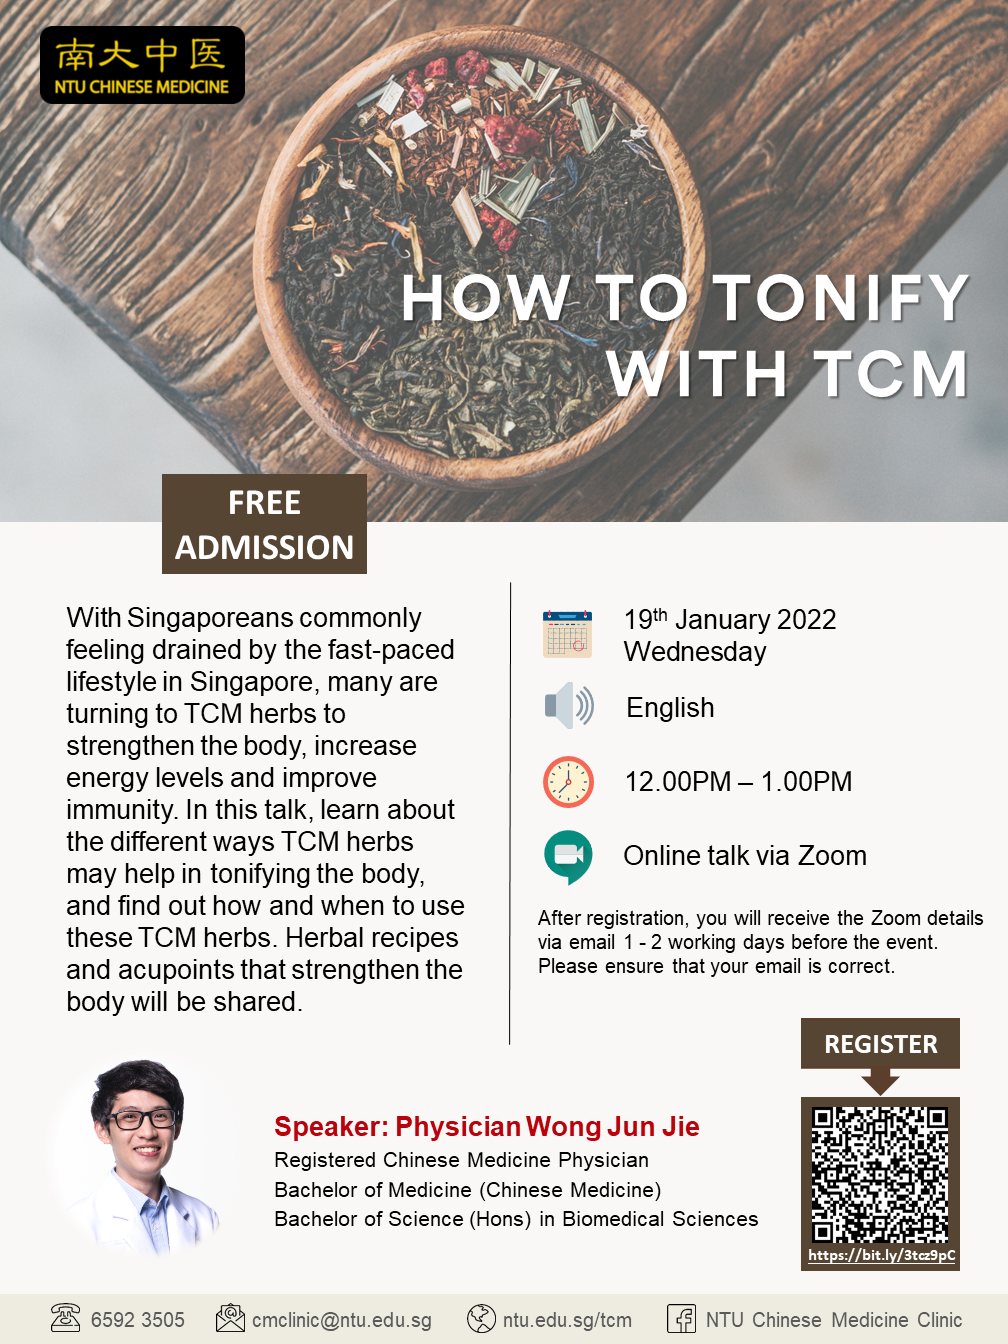 How to tonify with TCM